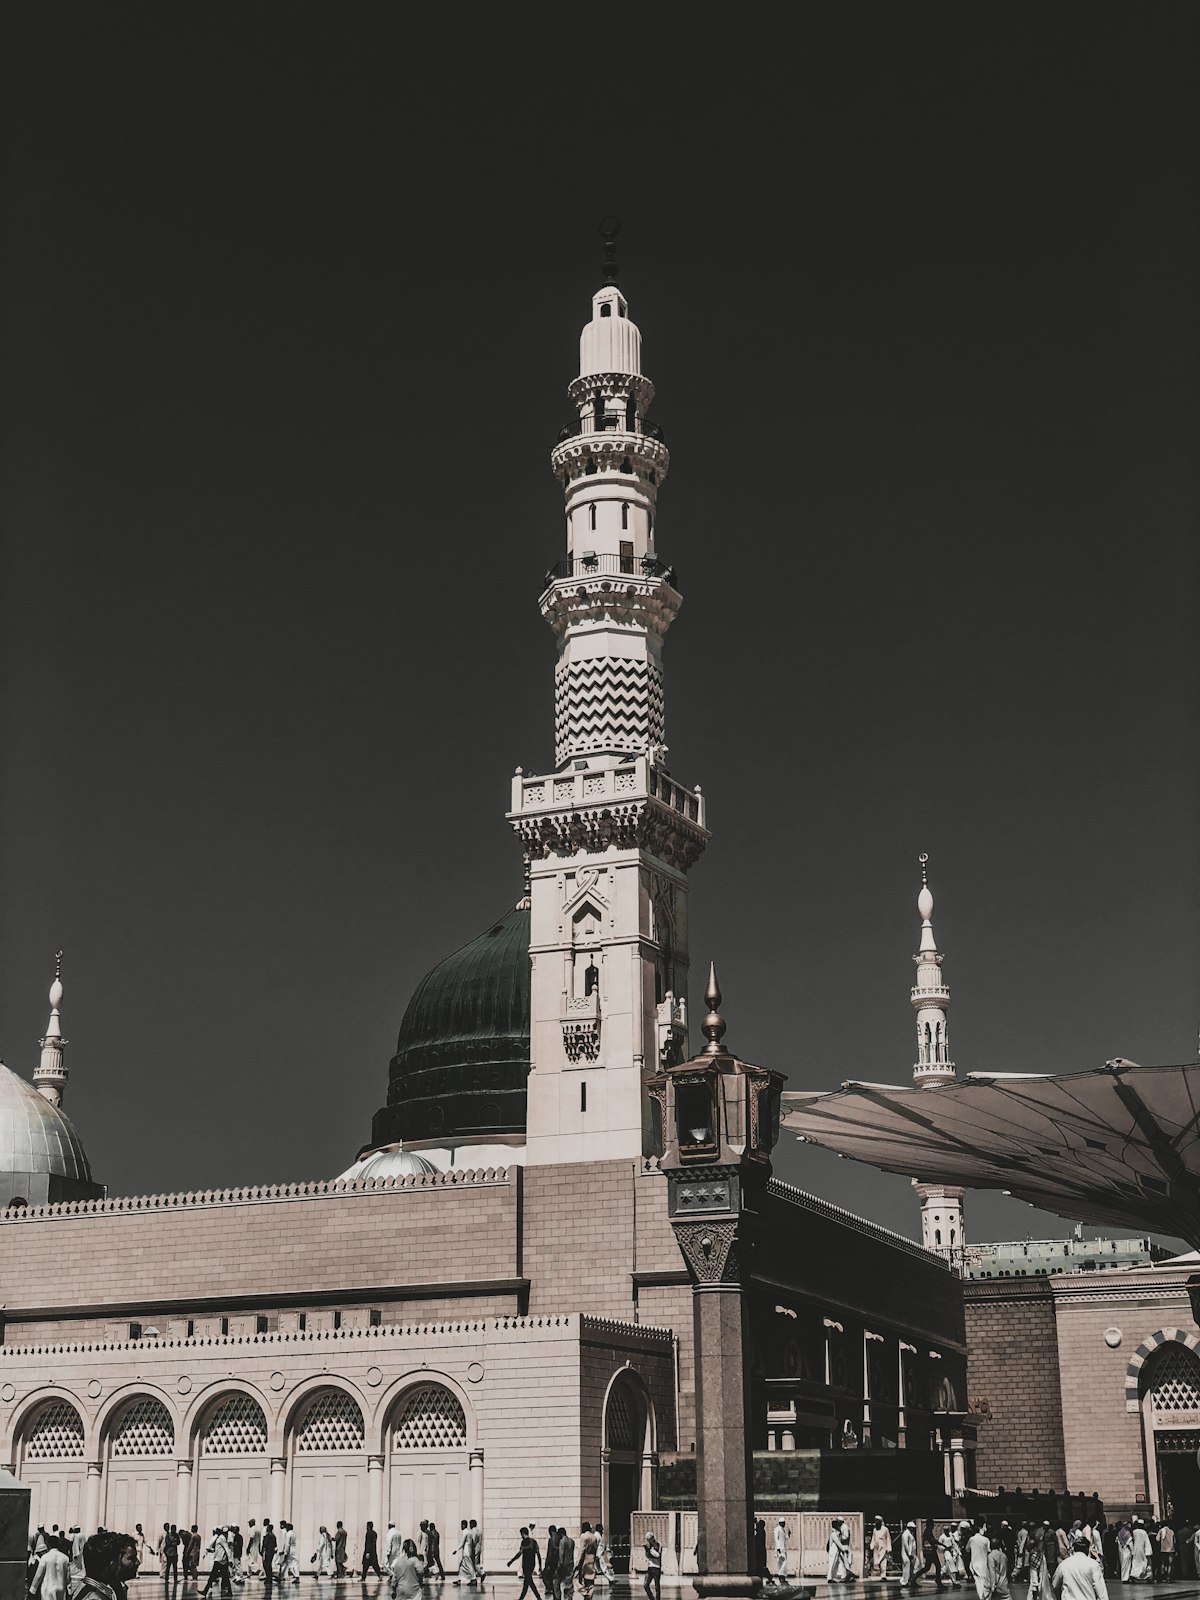 A Brief History of the Green Dome